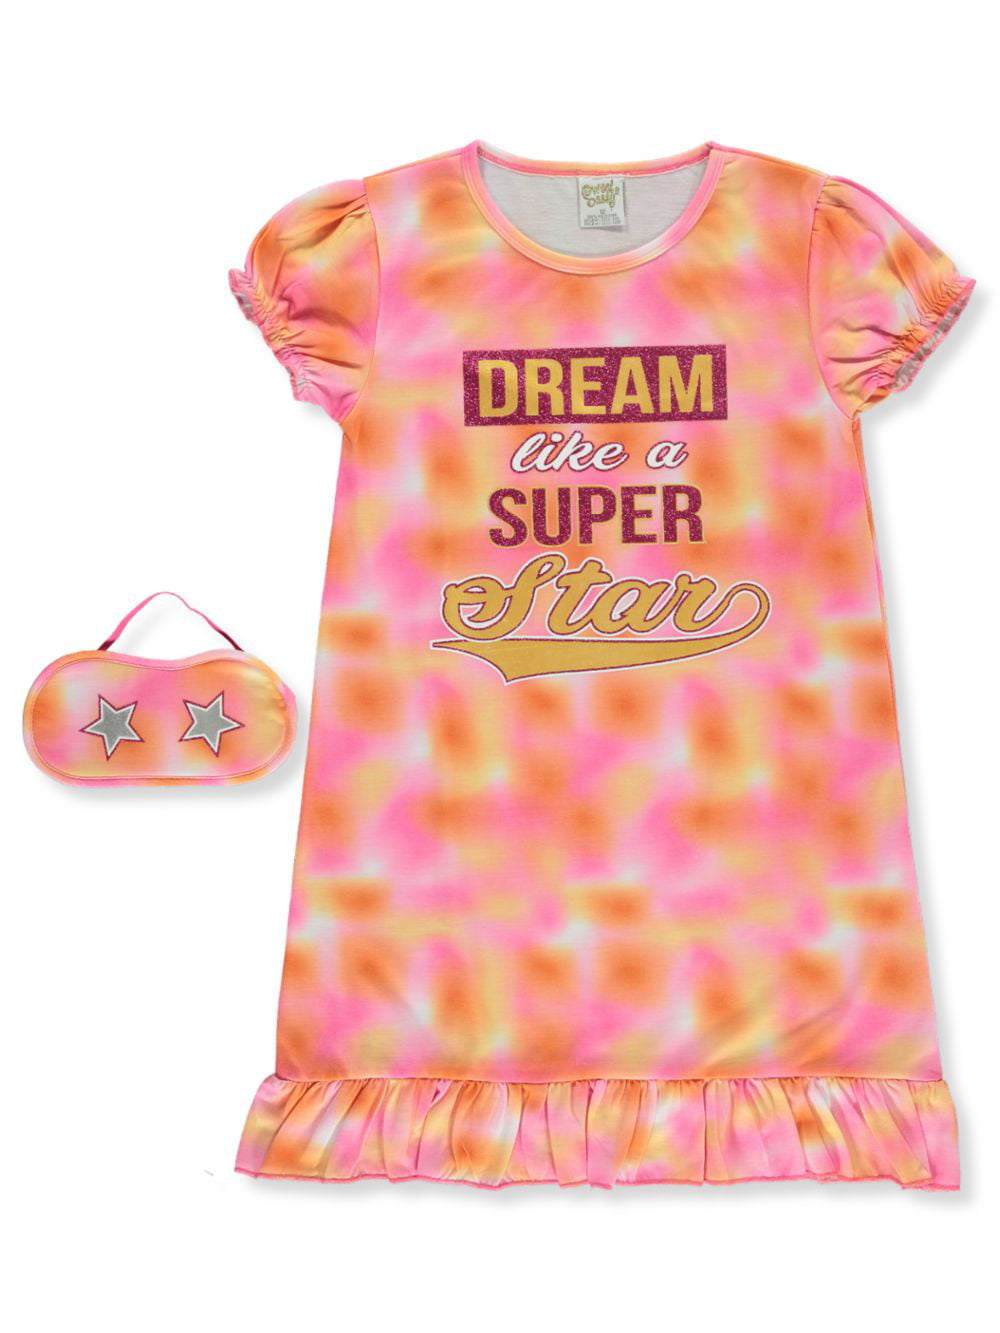 4 Piece Short Sleeve Nightgown with Eye Masks Sweet & Sassy Girls’ Nightgowns 